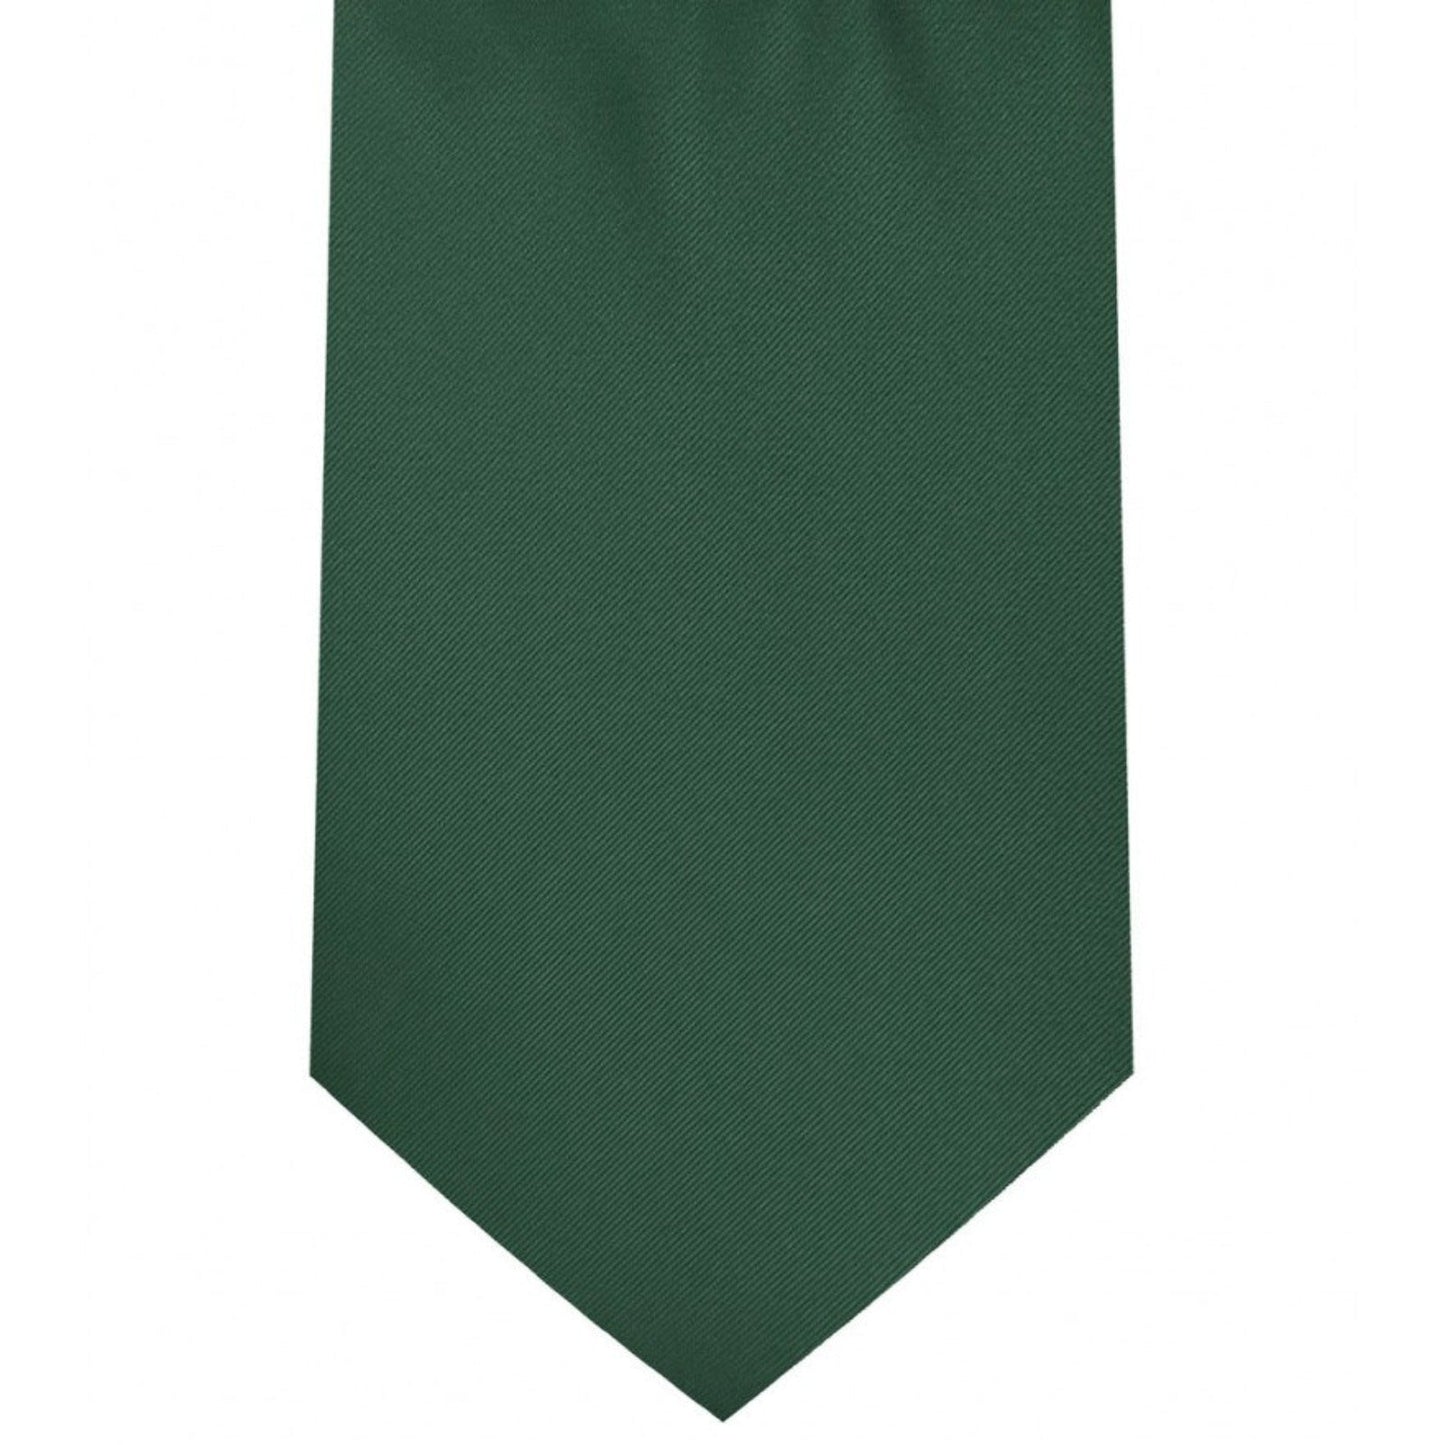 Classic Forest Green Tie Regular width 3.5 inches With Matching Pocket Square | KCT Menswear